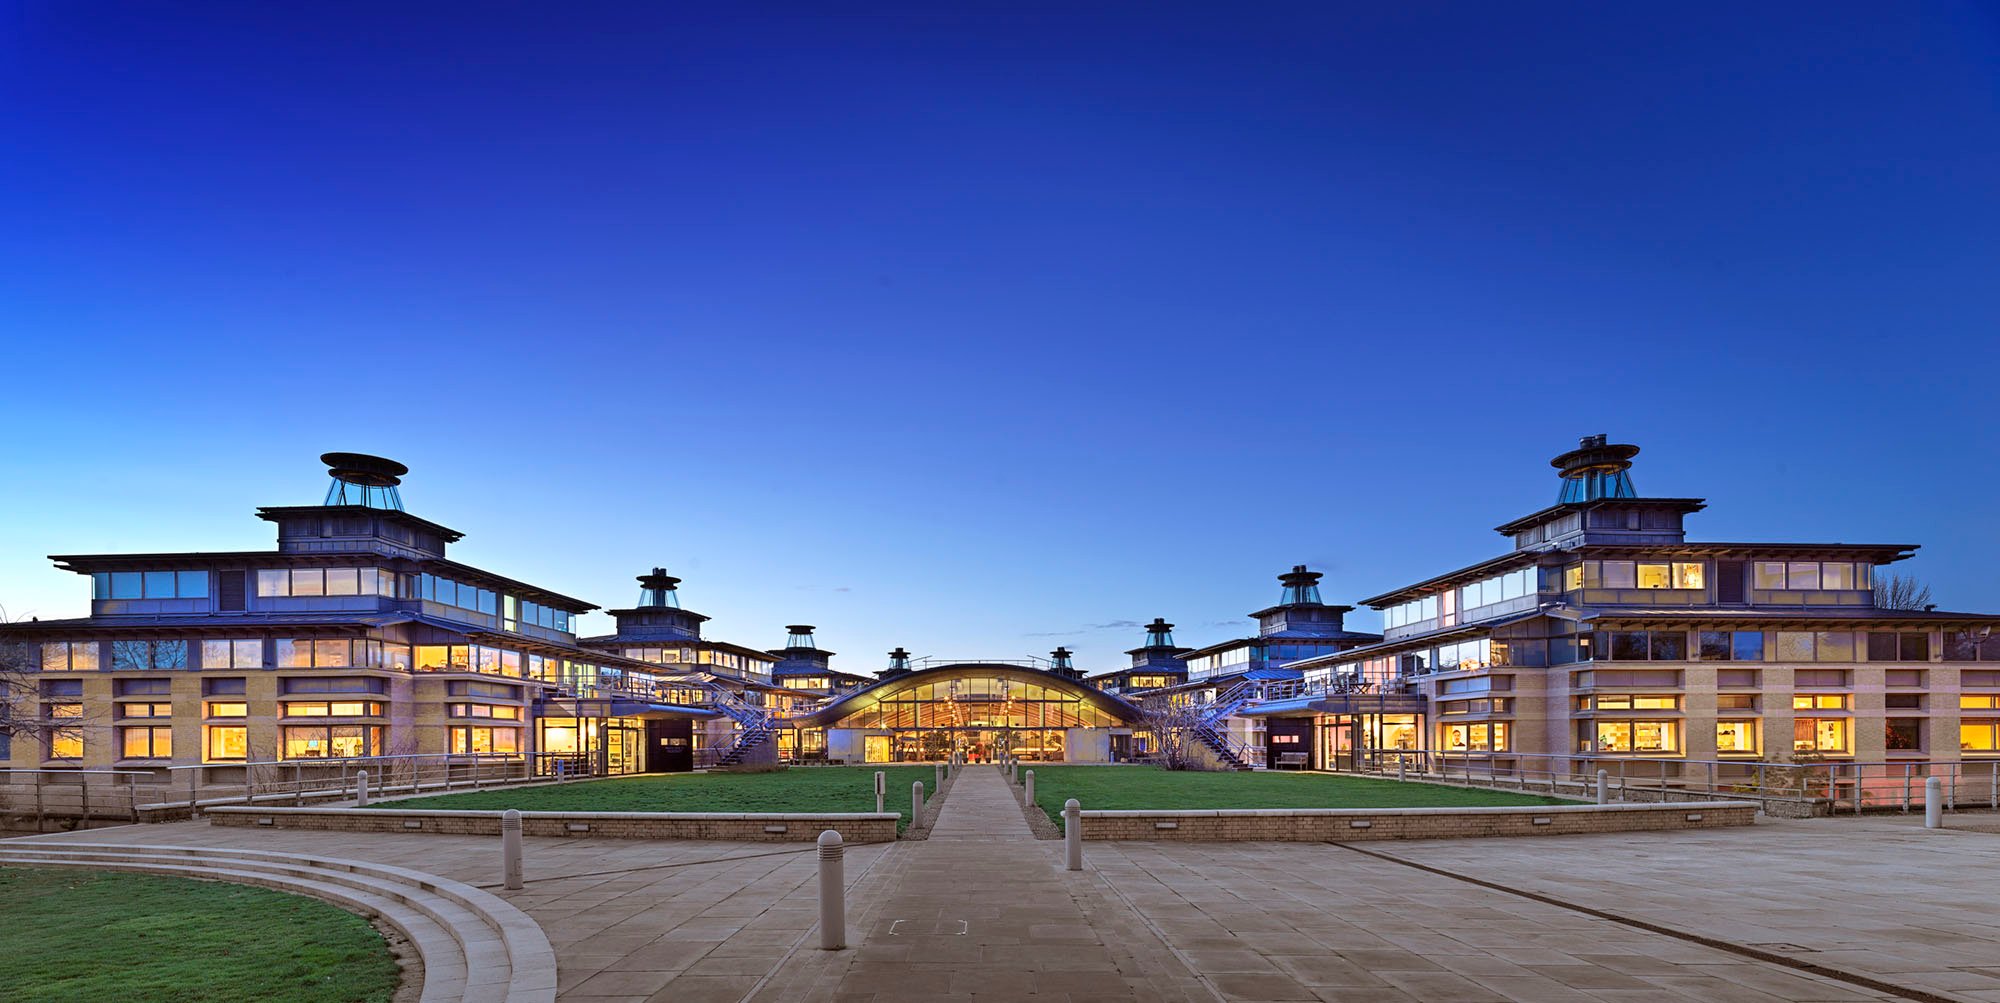 General view of the university mathematical sciences centre site illuminated at twilight, looking west towards the cafe and reception building and flanking pavilions